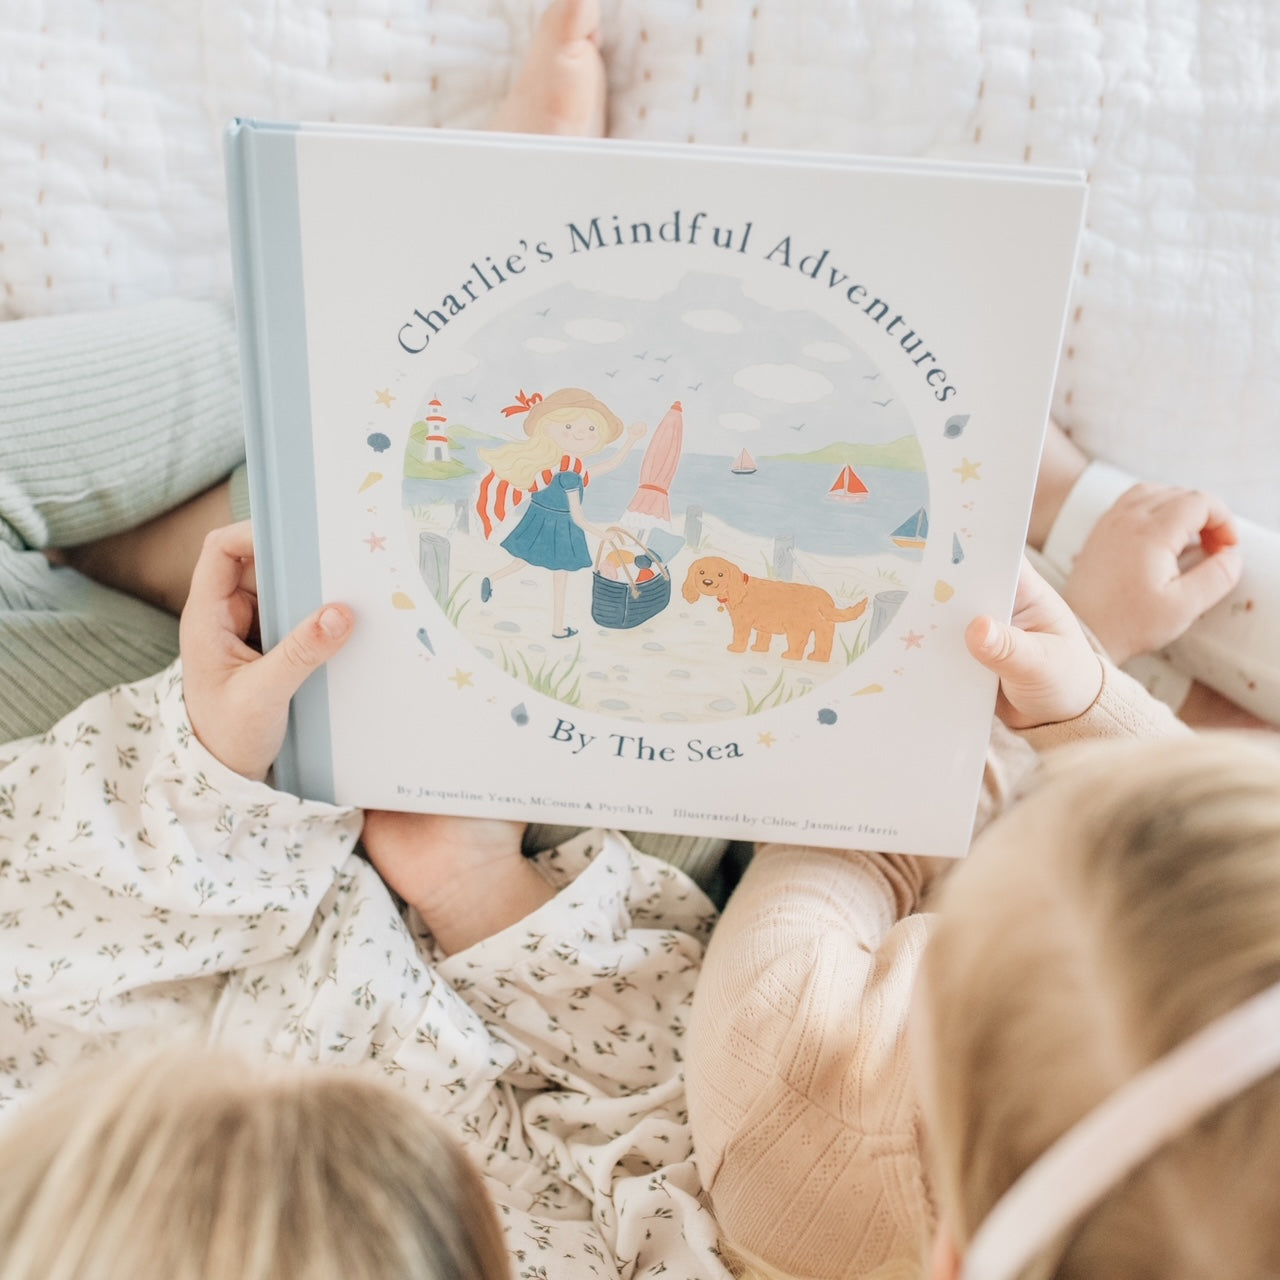 Book | Charlie's Mindful Adventures By The Sea